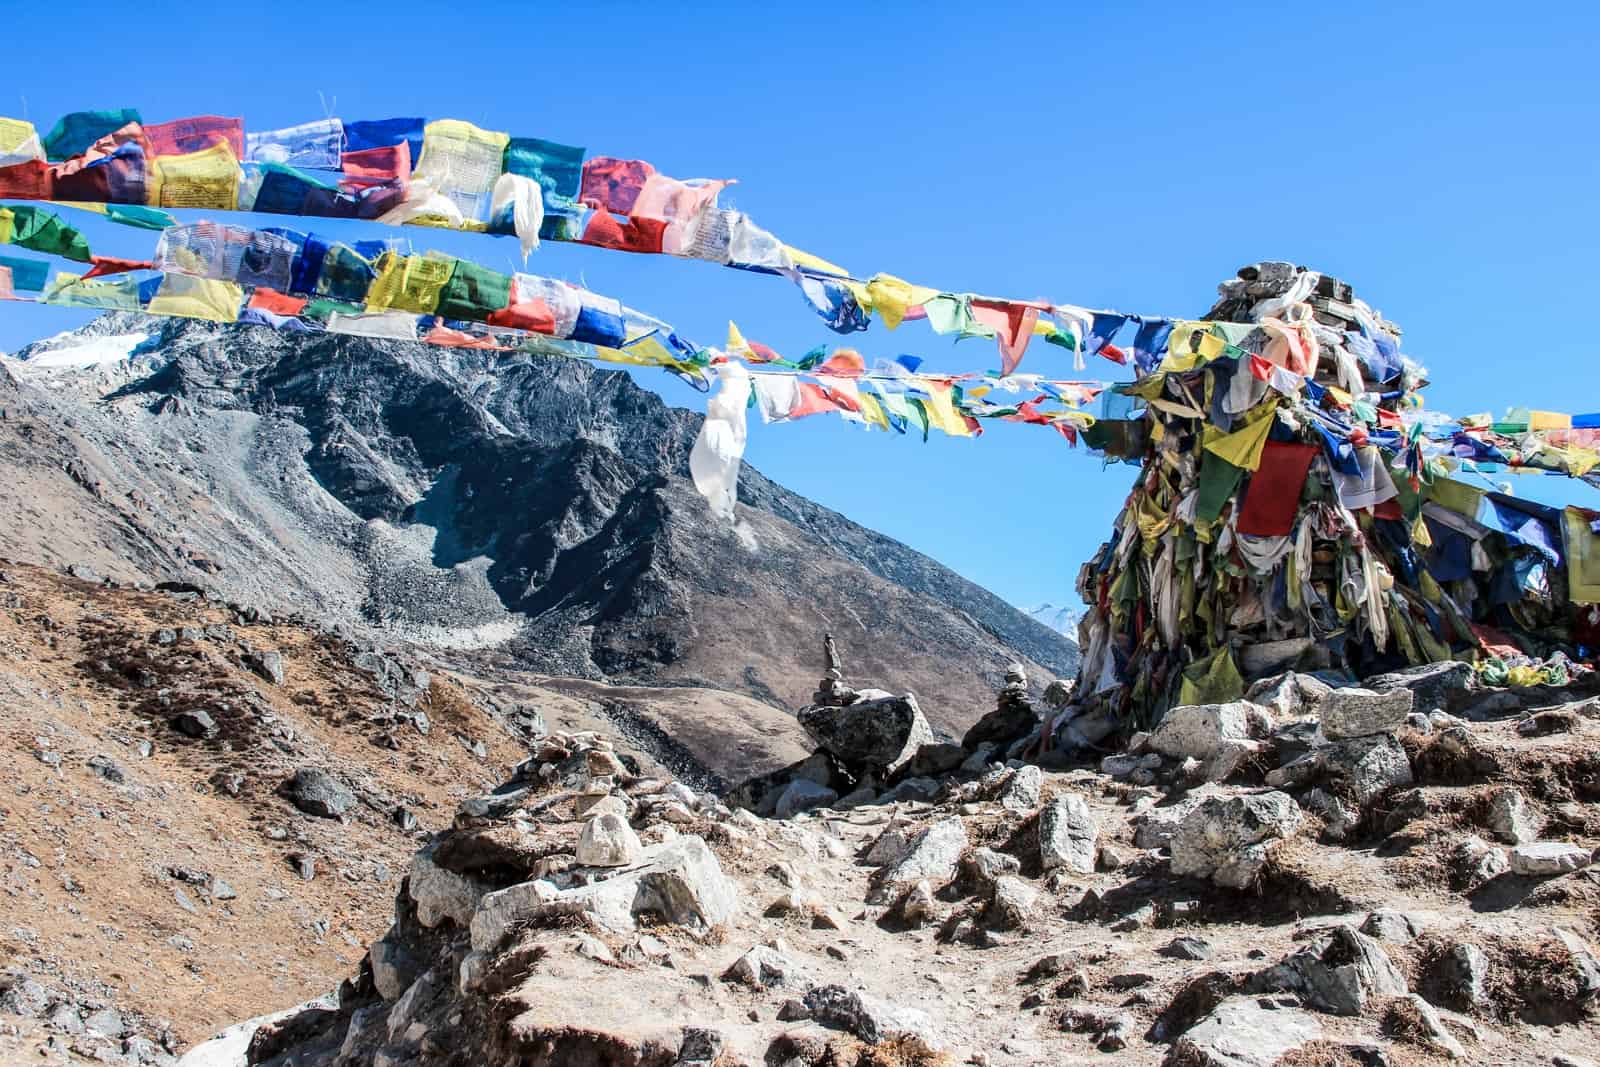 Two lines of multi-coloured prayer flags connect to a tall pile of rocks in a mountain valley on the Everest Base Camp trekking route